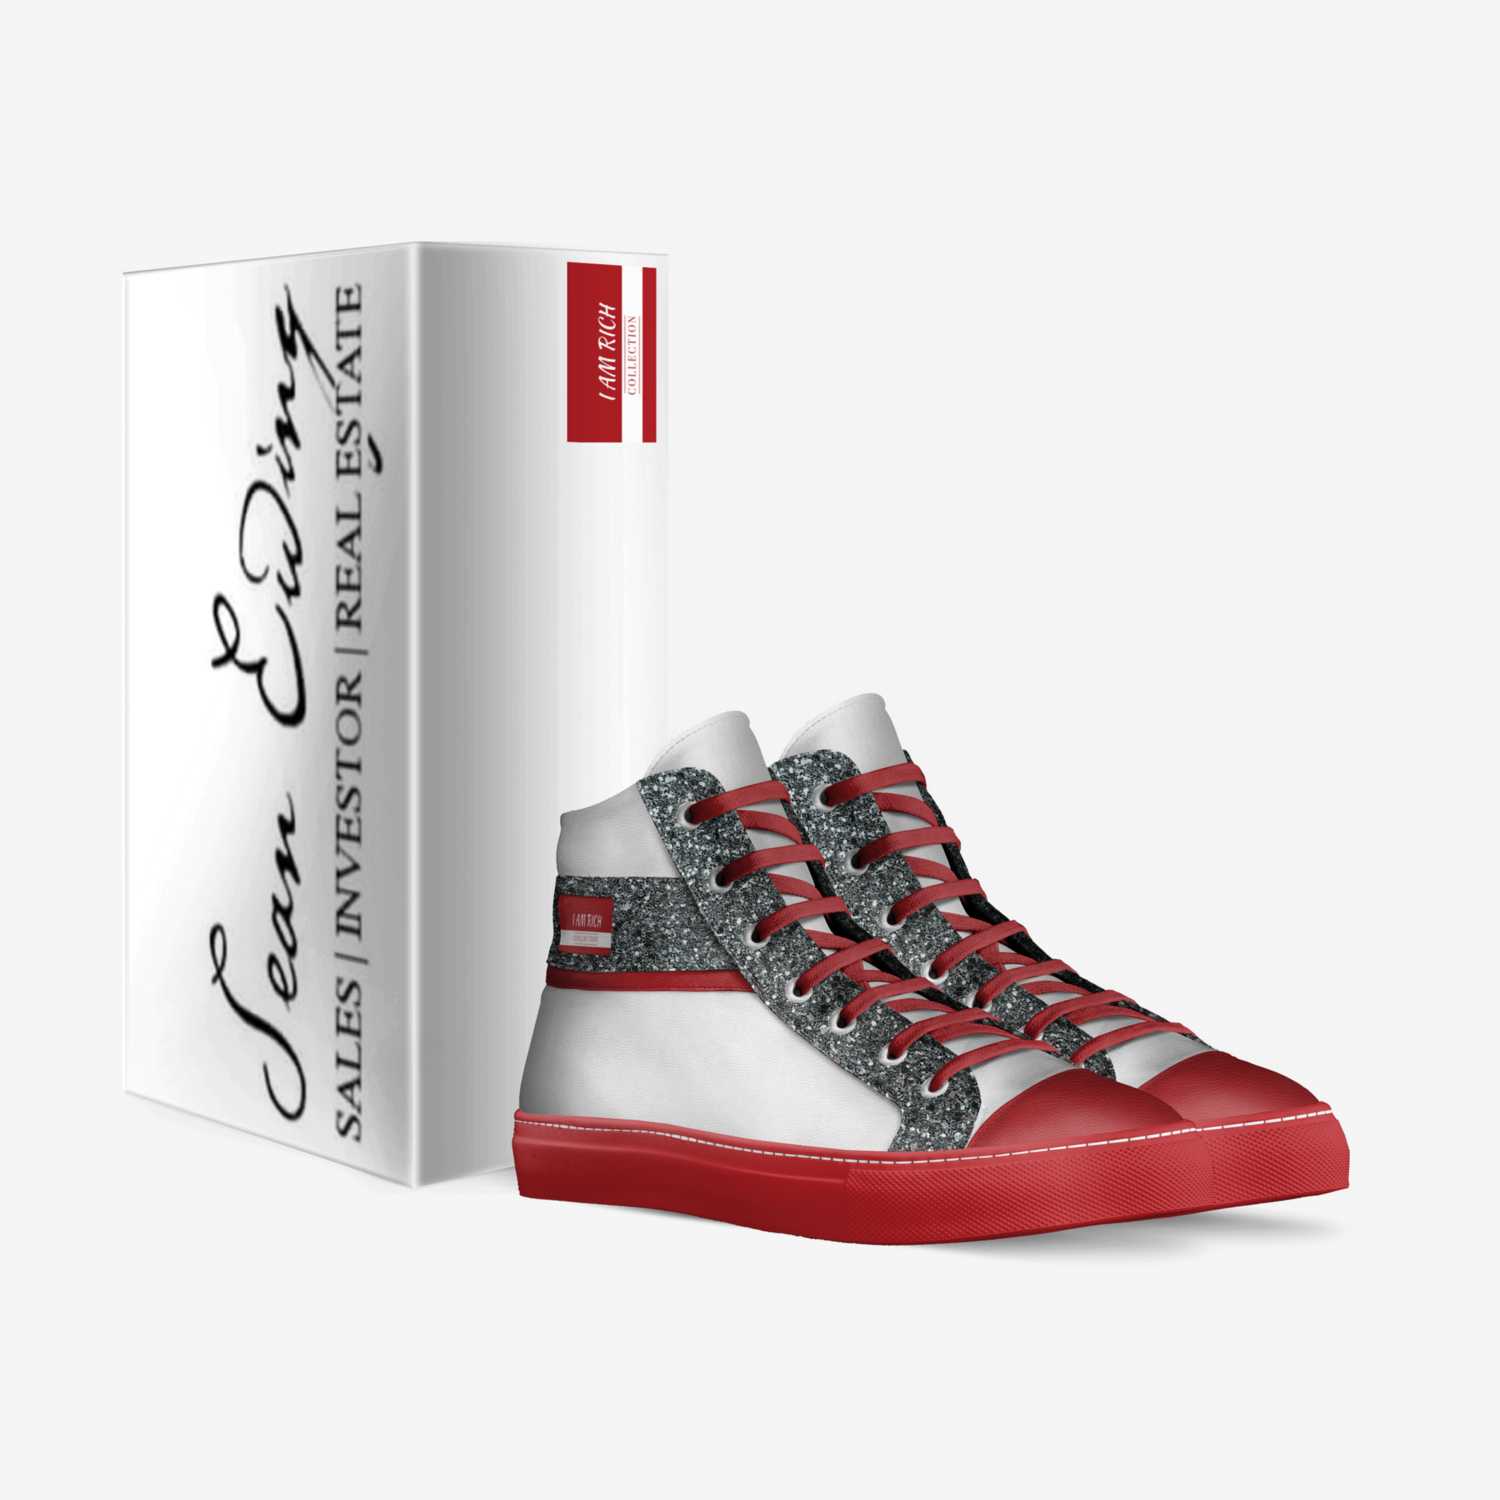 I AM RICH custom made in Italy shoes by Iamrich Iamrich | Box view